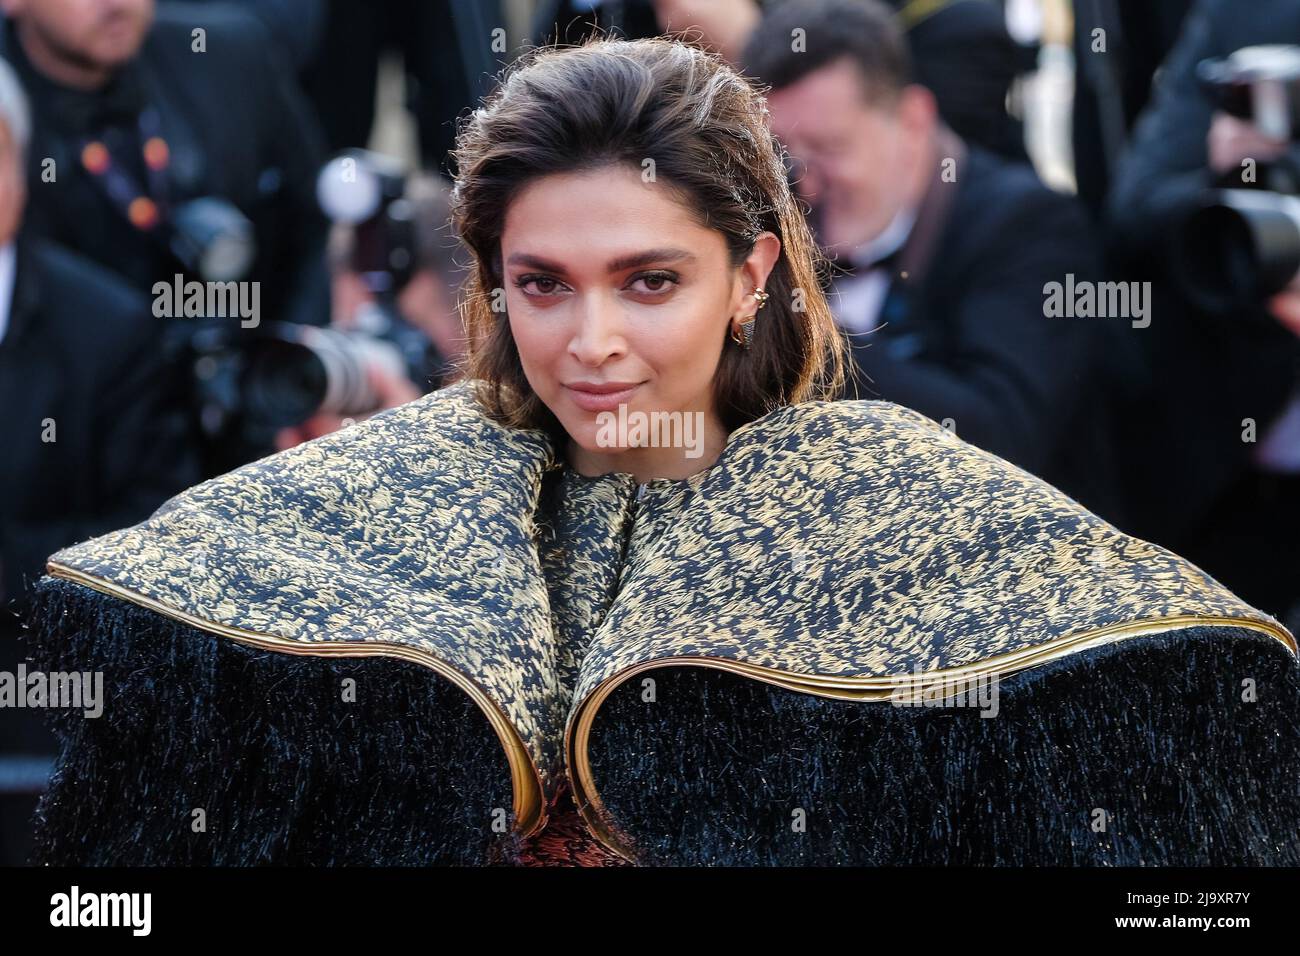 Cannes, France. 25th May, 2022. Cannes, France, Wednesday, May. 25, 2022 - Deepika Padukone seen at the Elvis red carpet during the 75th Cannes Film Festival at Palais des Festivals et des Congrès de Cannes . Picture by Credit: Julie Edwards/Alamy Live News Stock Photo